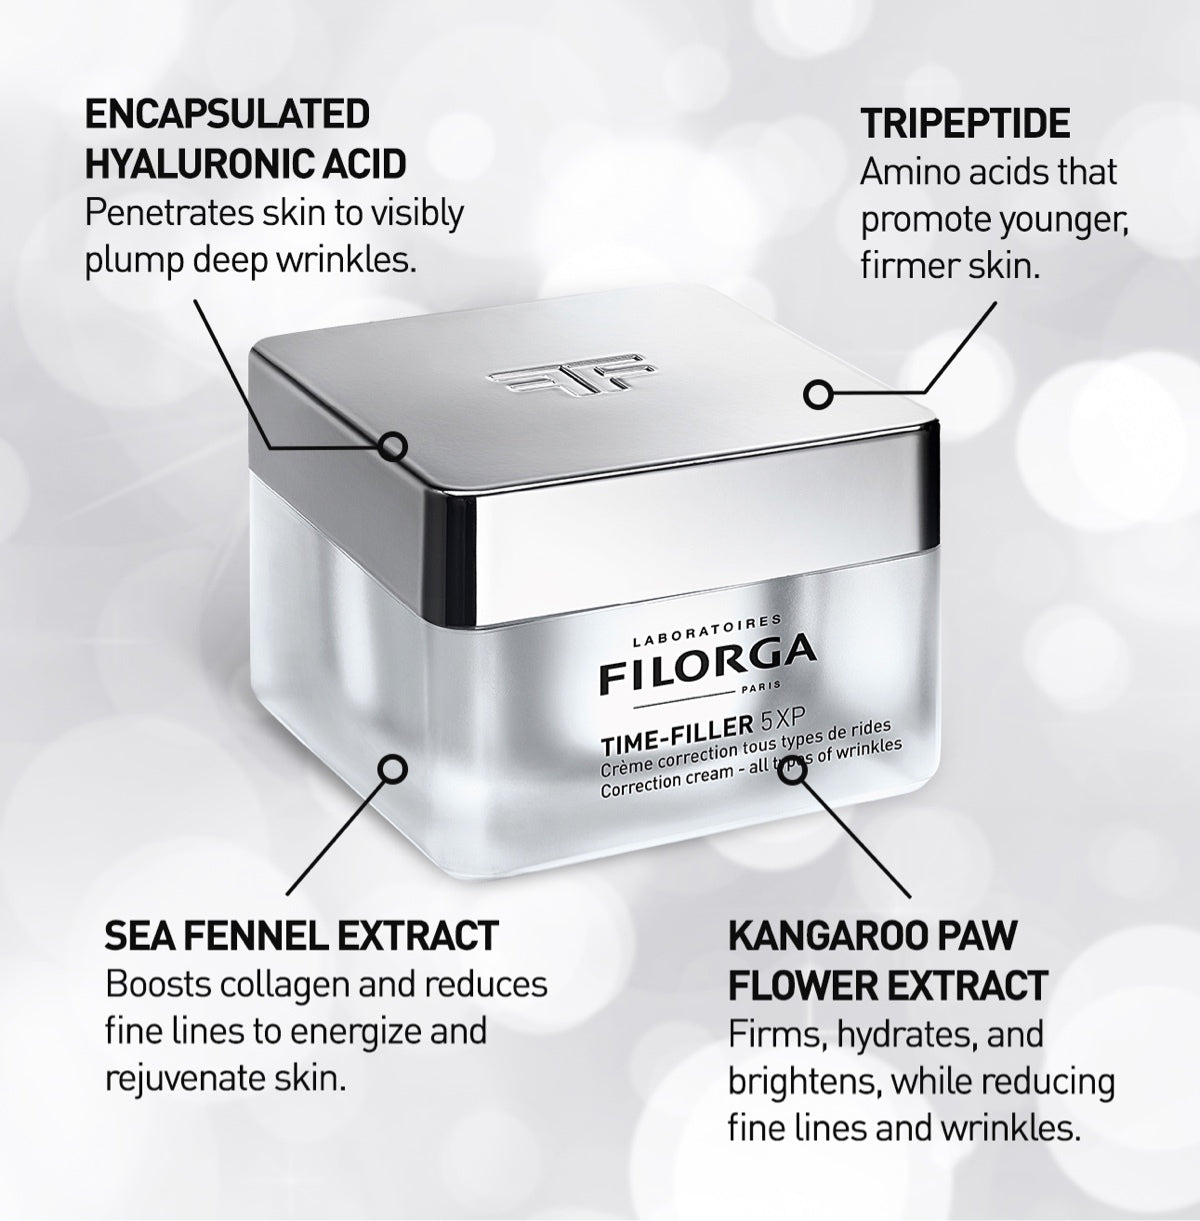 Jar of closed FILORGA TIME-FILLER 5XP CREAM highlighting four ingredients and their action